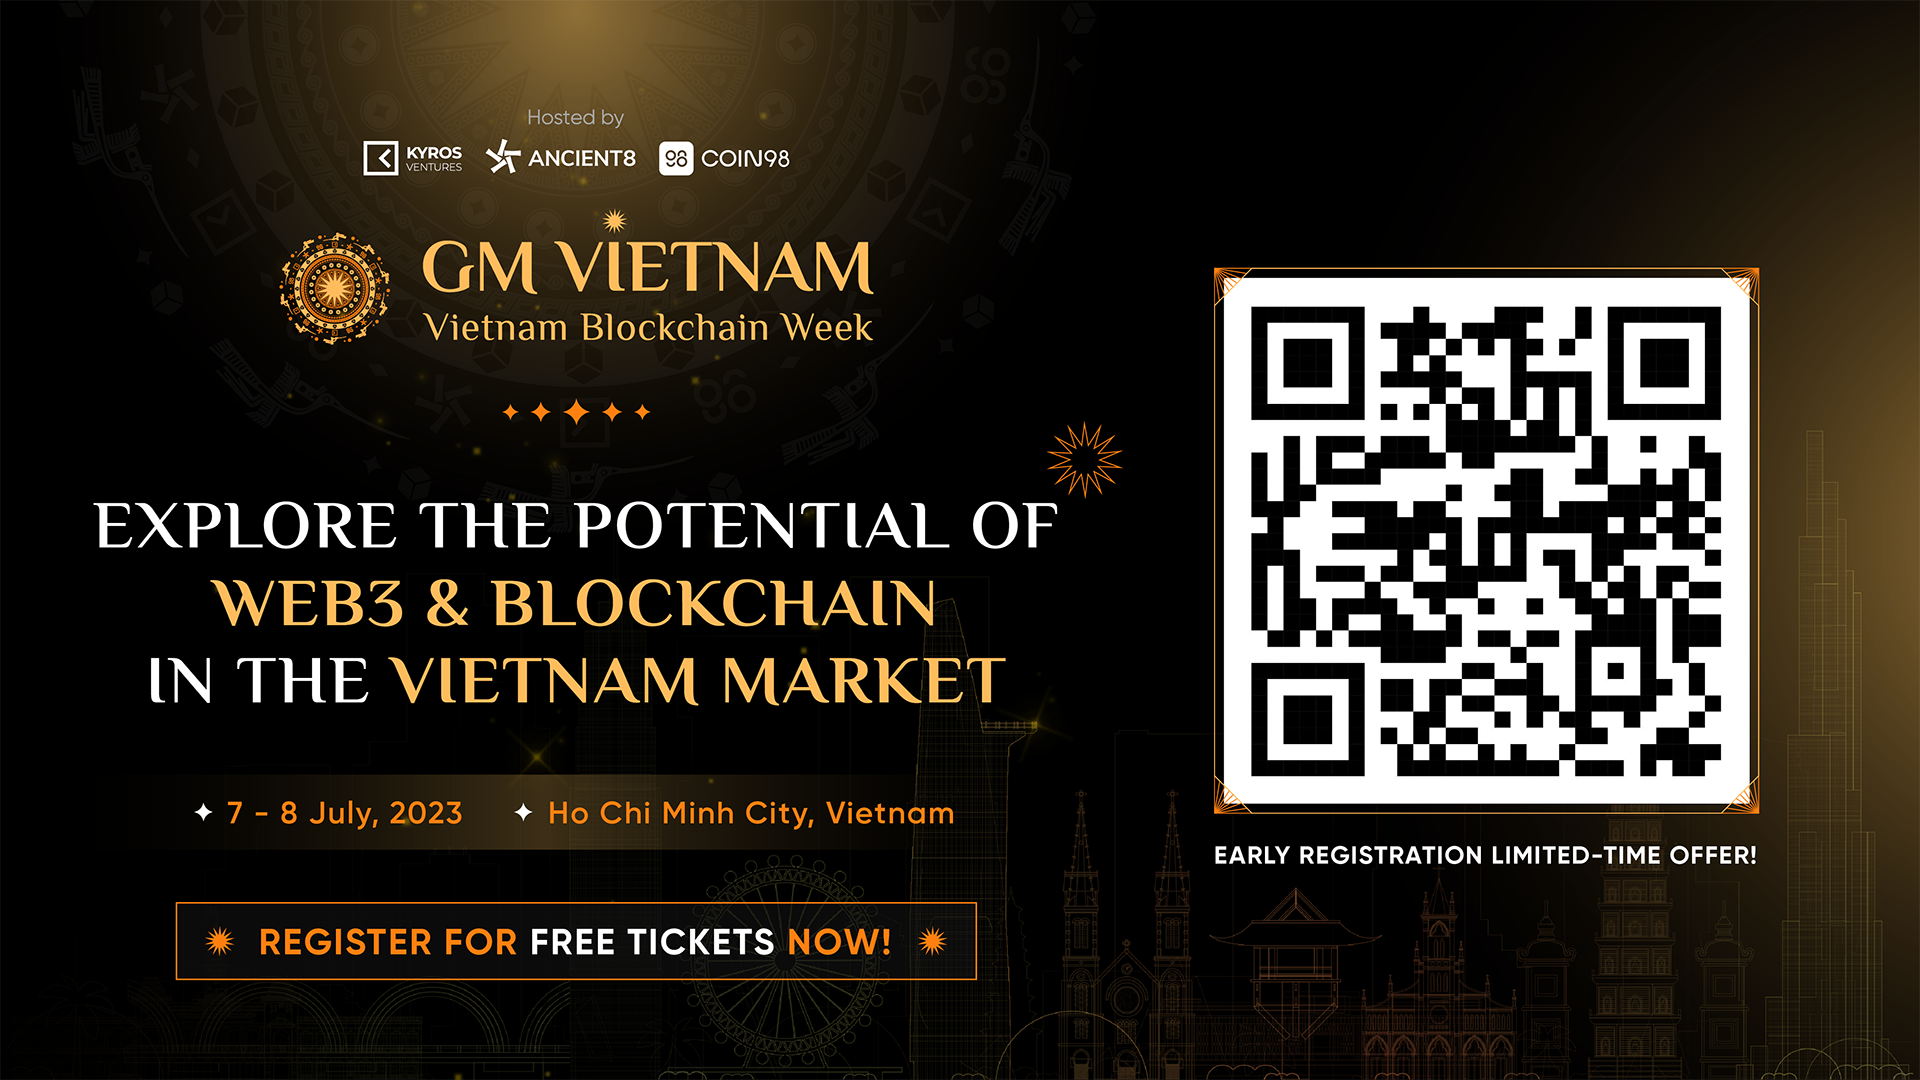 GM Vietnam - Explore the Potential of Web3 and Blockchain in the Vietnam Market